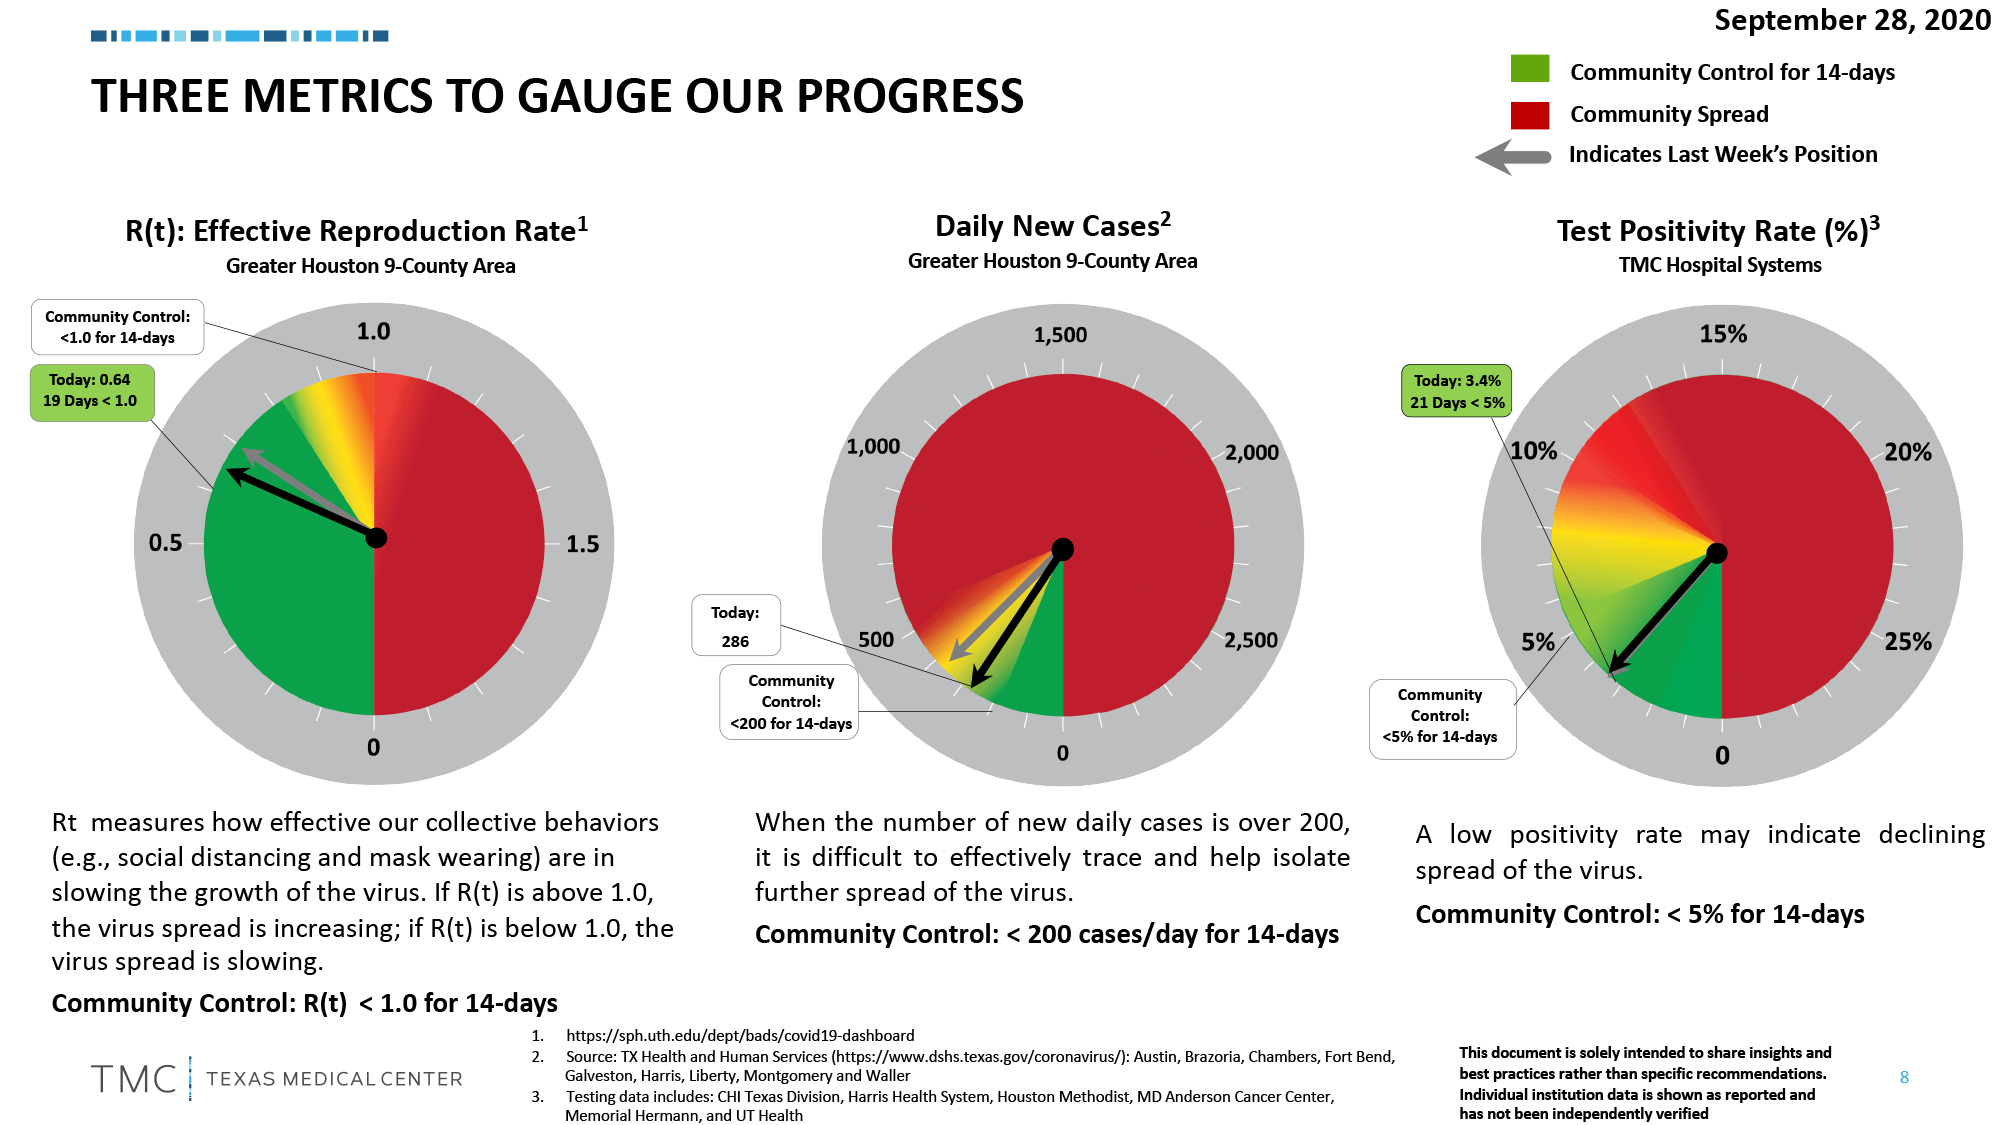 ag-Three-Metrics-To-Gauge-Our-Progress-NEW-9-29-2020.png